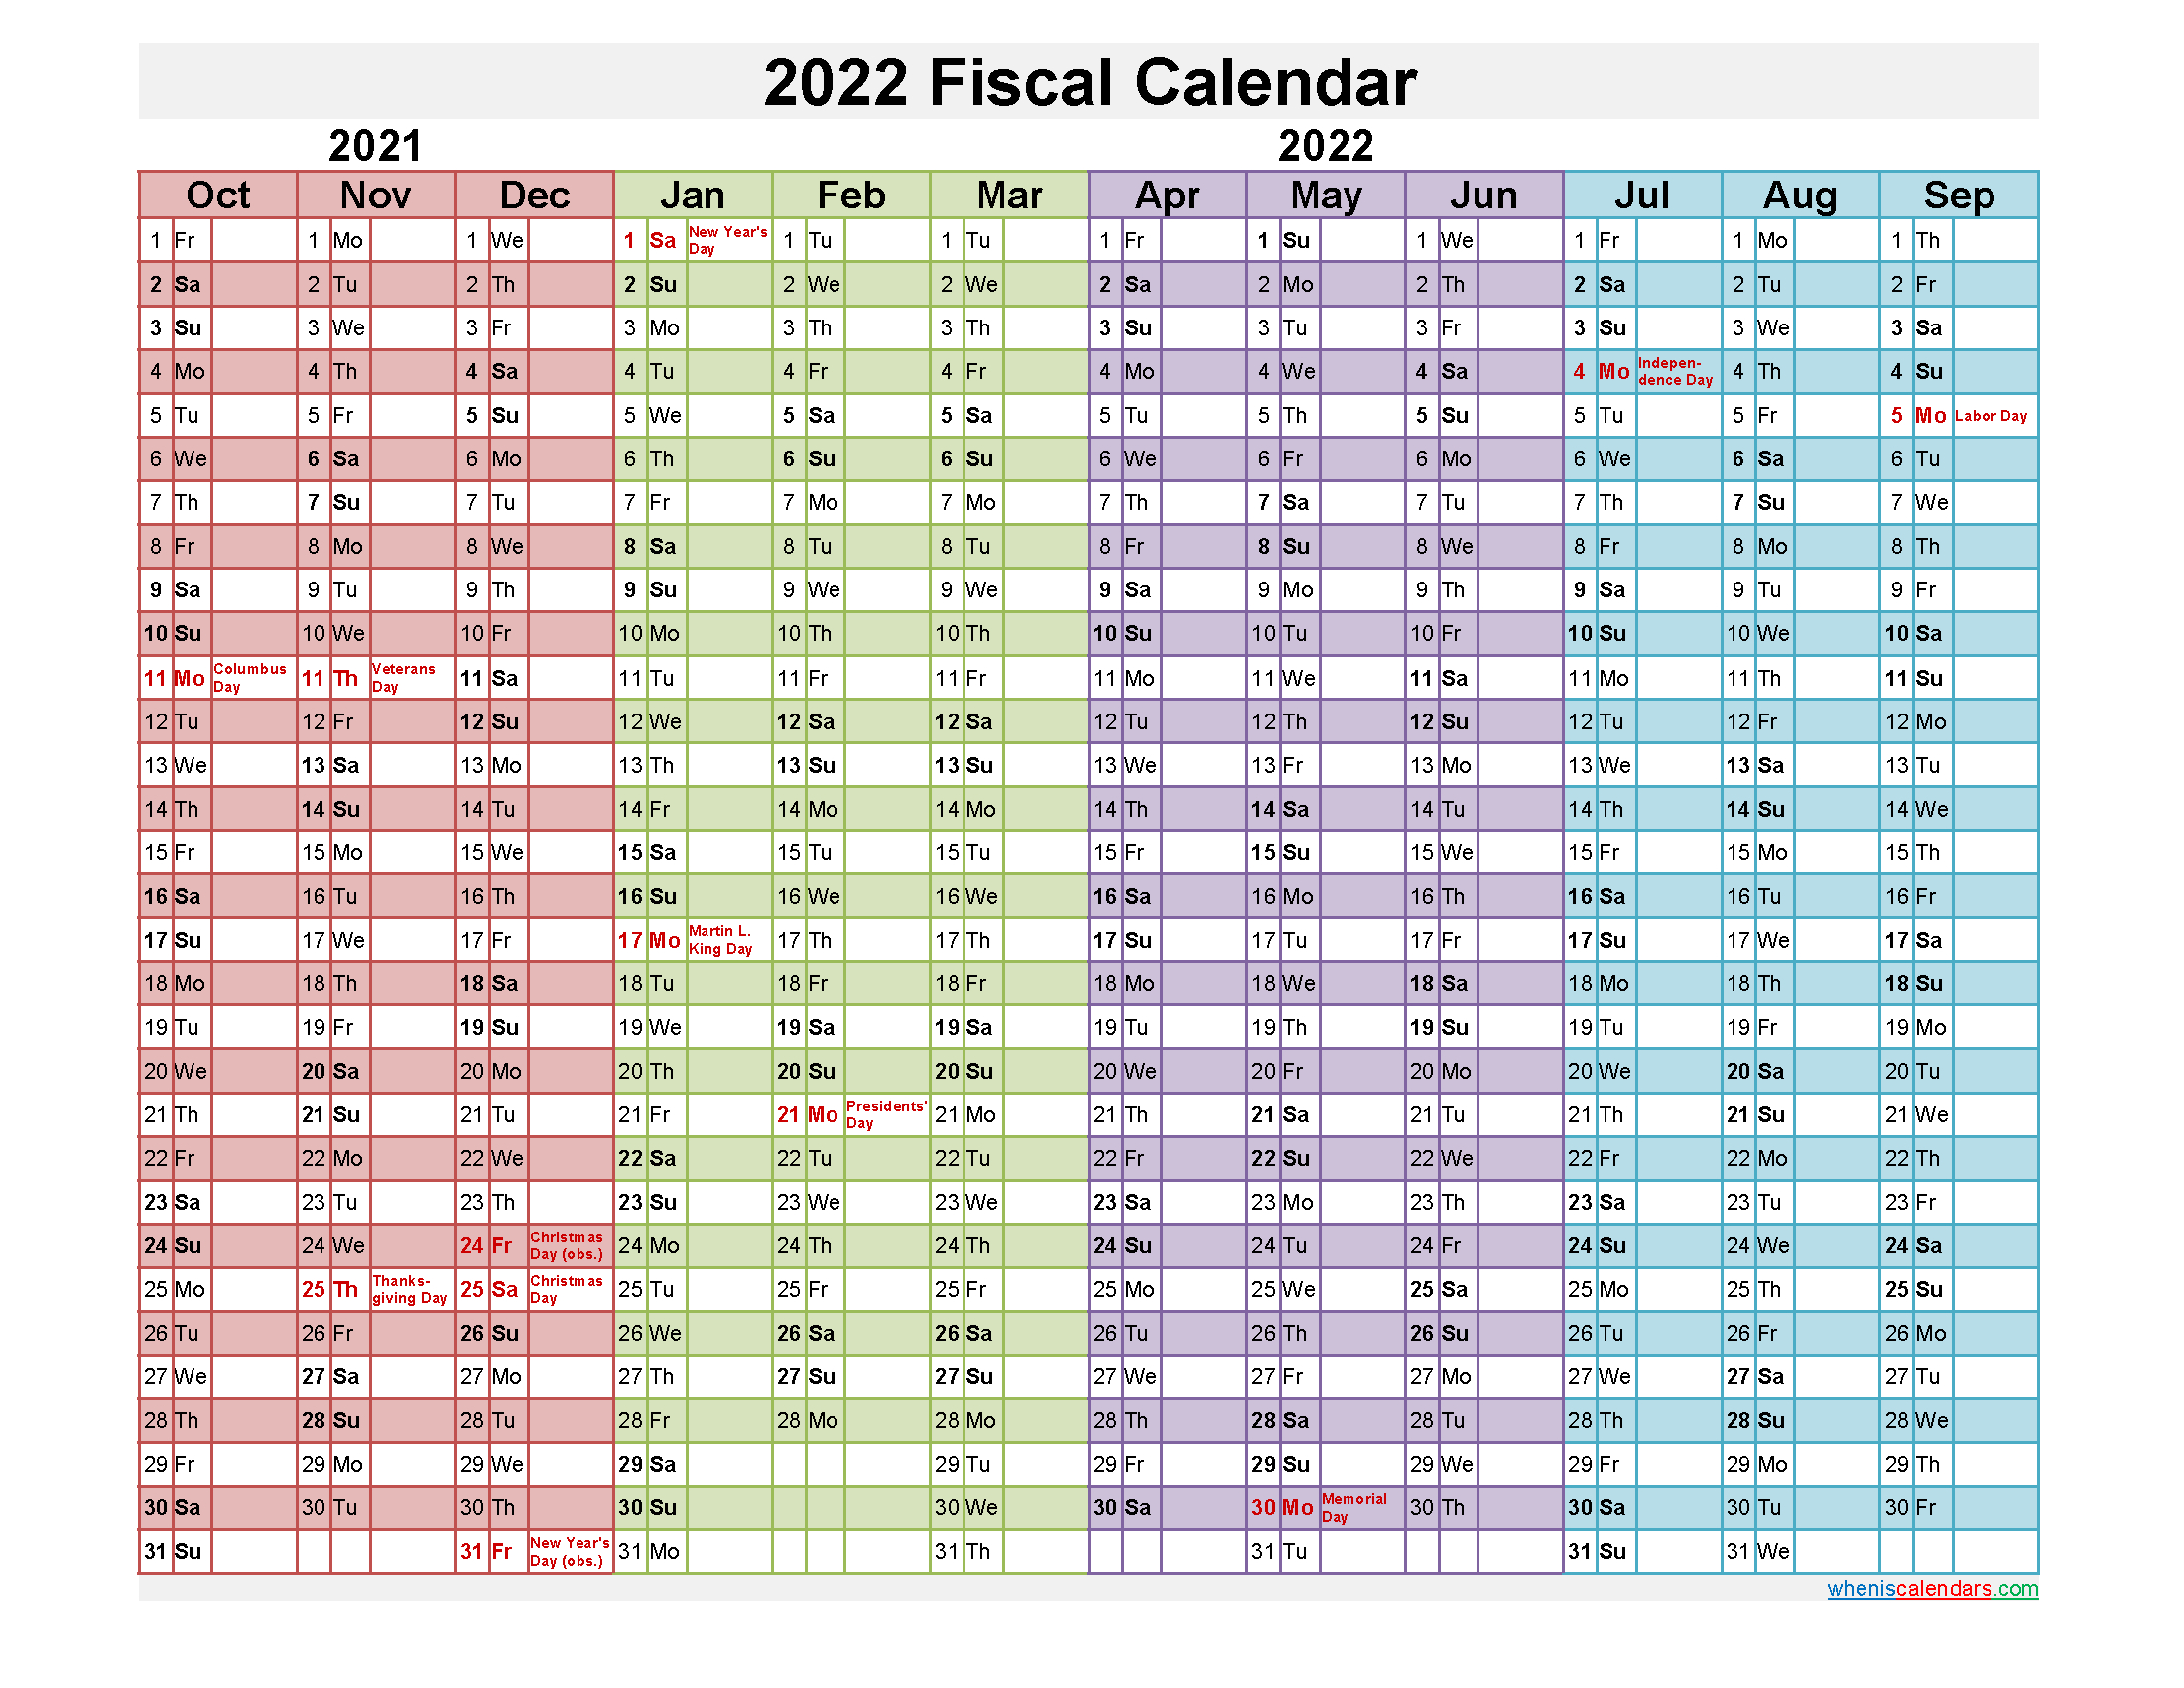 Fiscal Year 2022 Calendar - Template No.fiscal22Y21-Fiscal Year Calender Print October